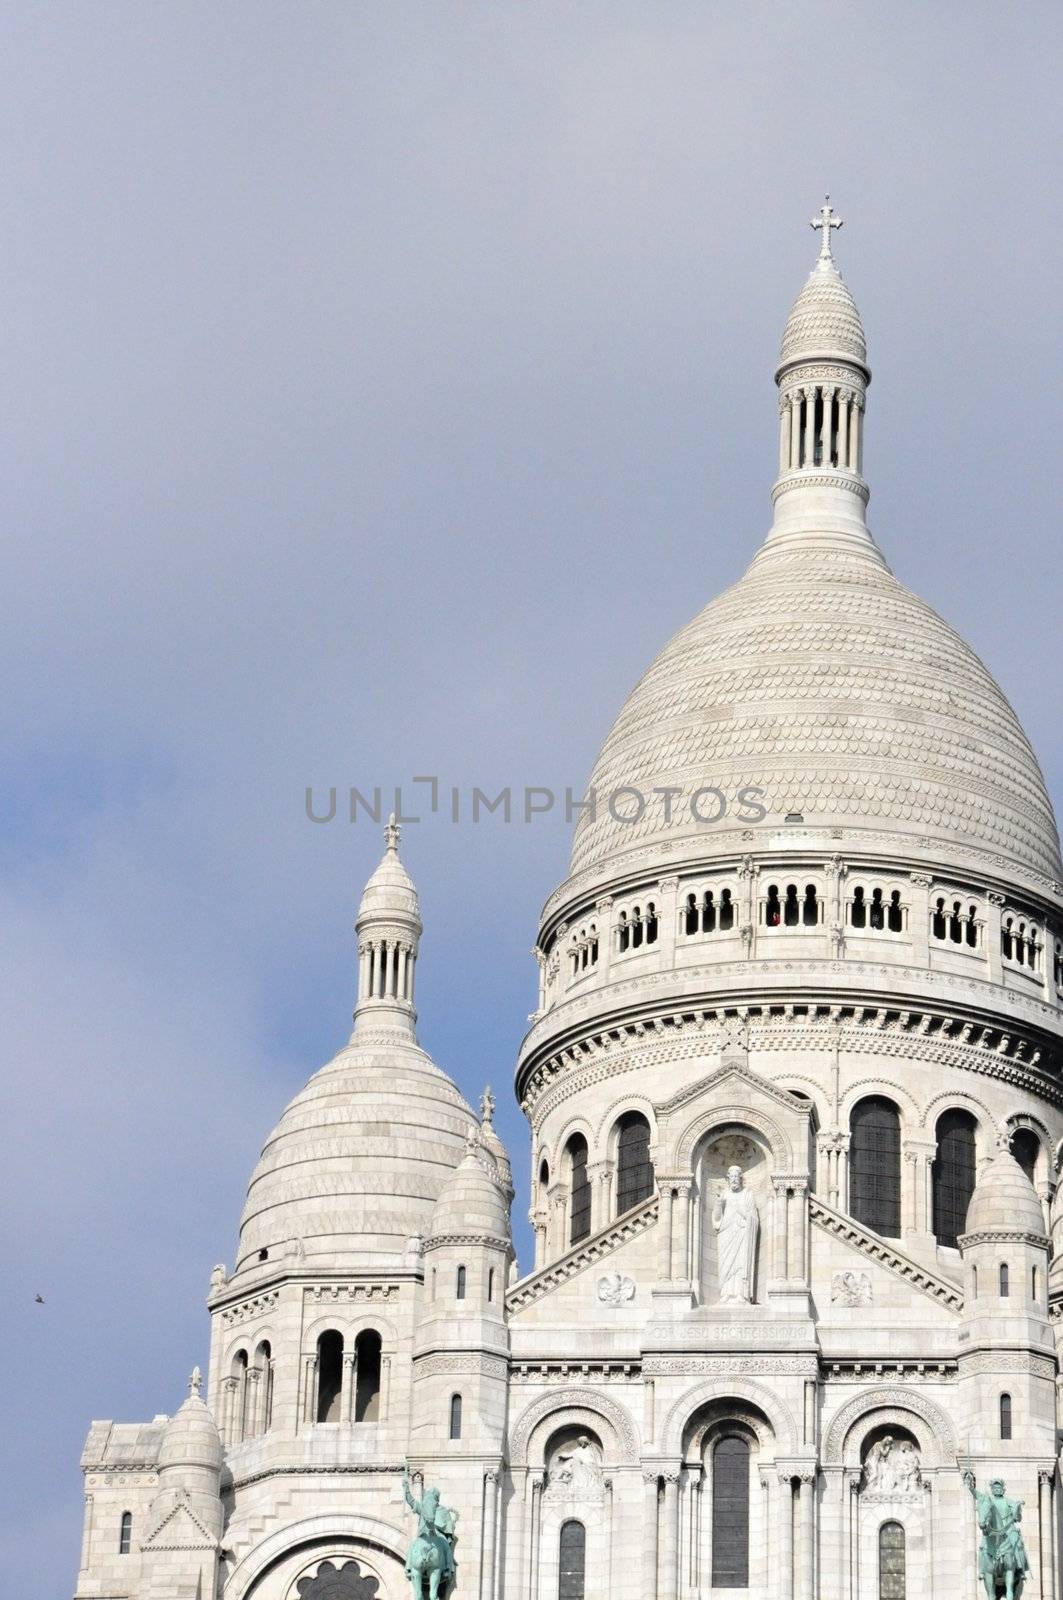 The Basilica of the Sacred Heart of Jesus of Paris, commonly known as Sacr�-Coeur Basilica